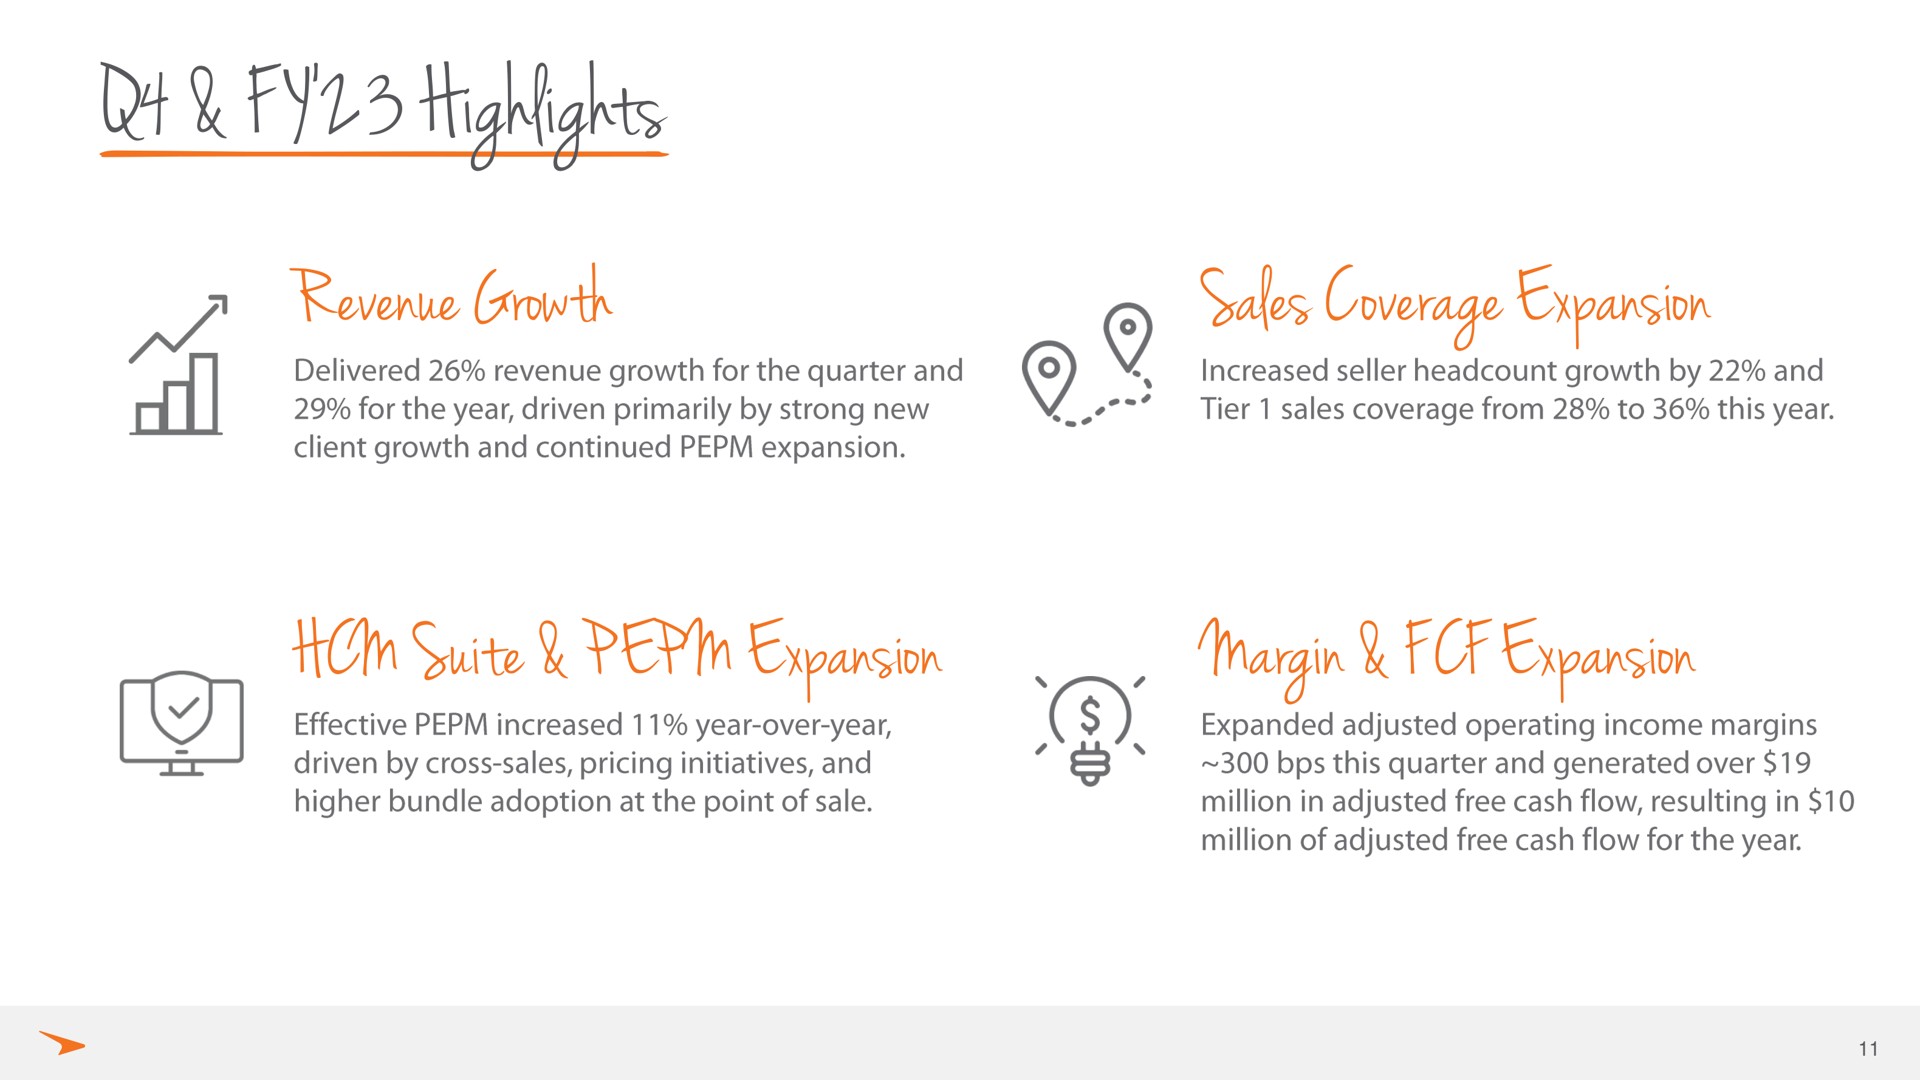 highlights revenue growth sales coverage expansion suite expansion margin expansion | Paycor